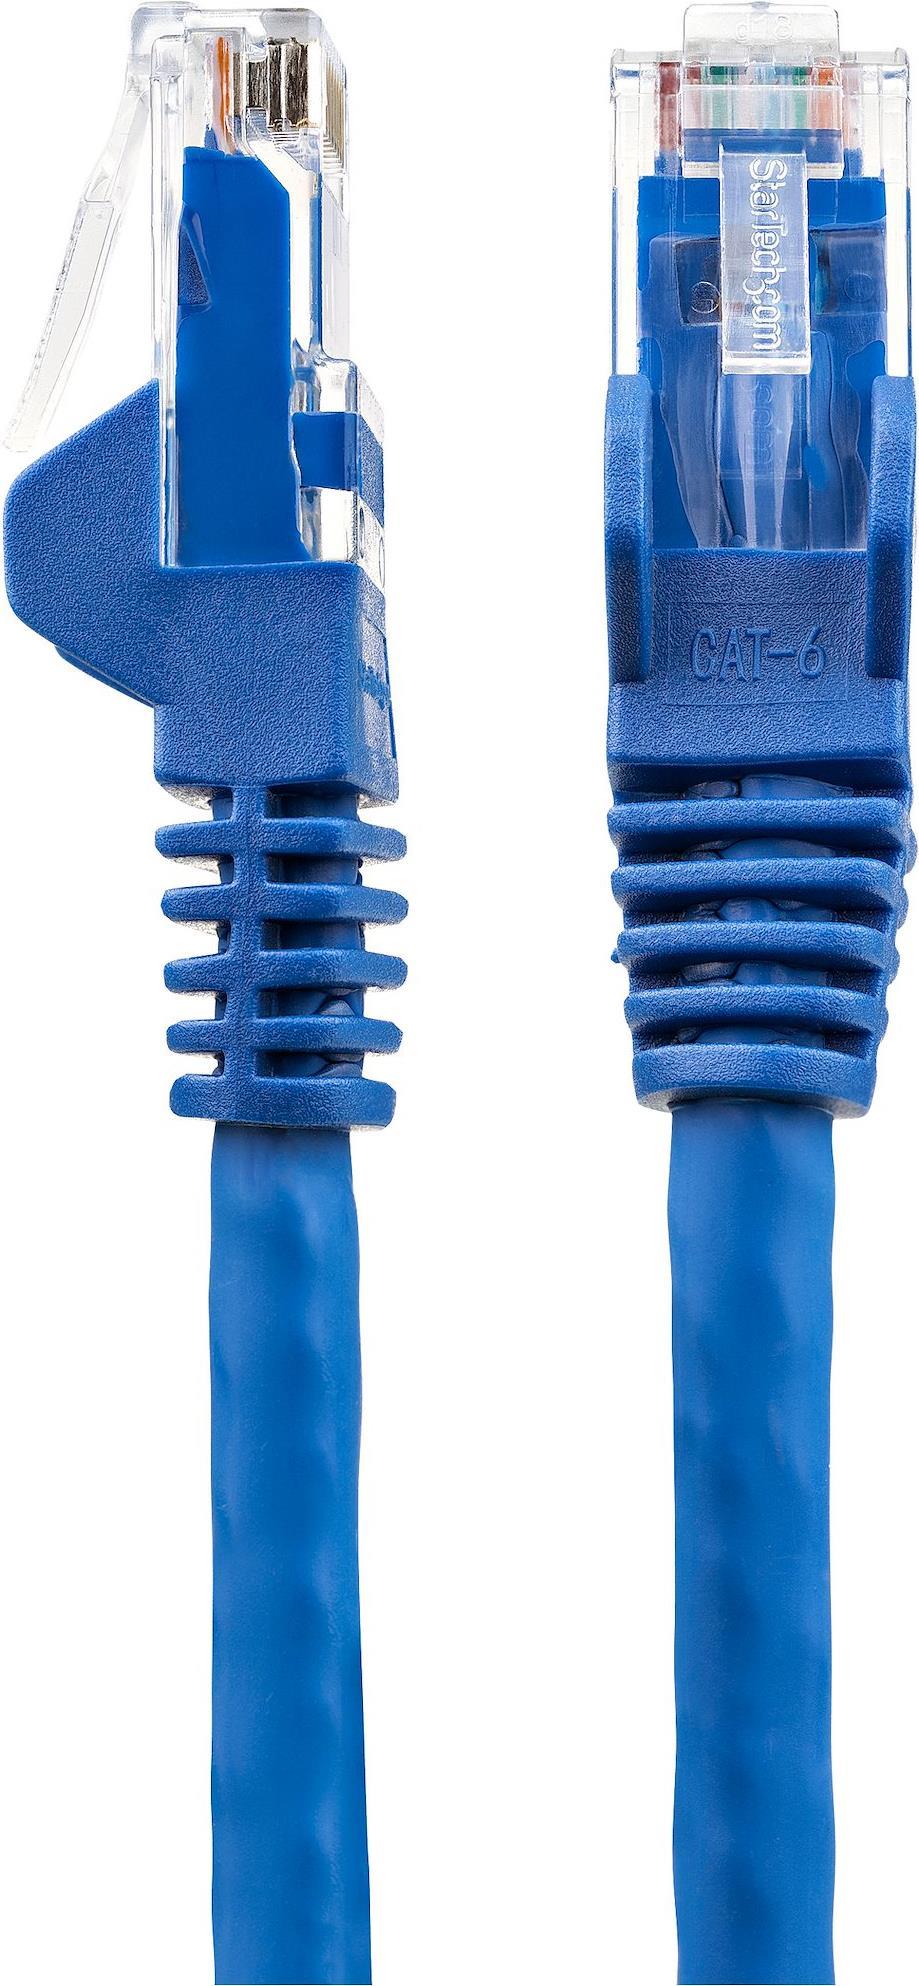 StarTech.com 15m LSZH CAT6 Ethernet Cable, 10 Gigabit Snagless RJ45 100W PoE Network Patch Cord with Strain Relief, CAT 6 10GbE UTP, Blue, Individually Tested/ETL, Low Smoke Zero Halogen (N6LPATCH15MBL)